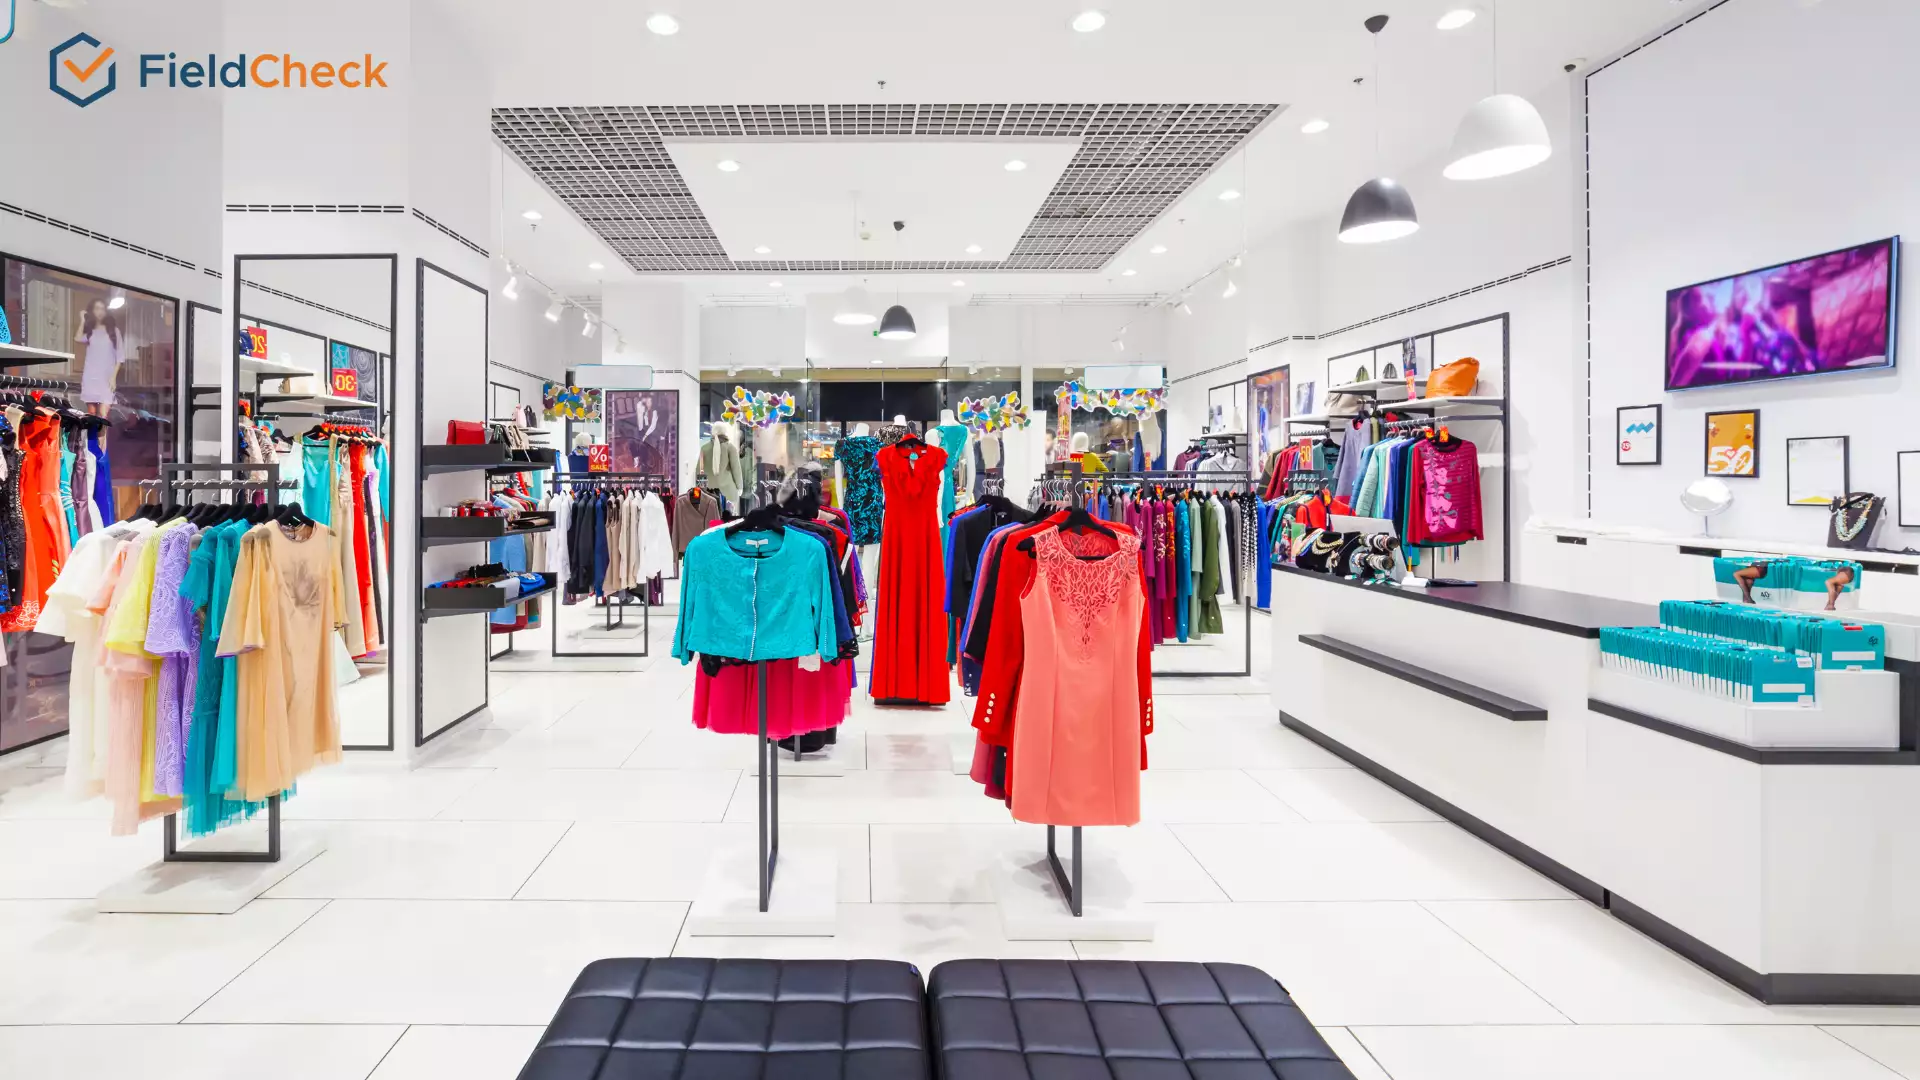 How To Manage Clothing Store Chains Optimally